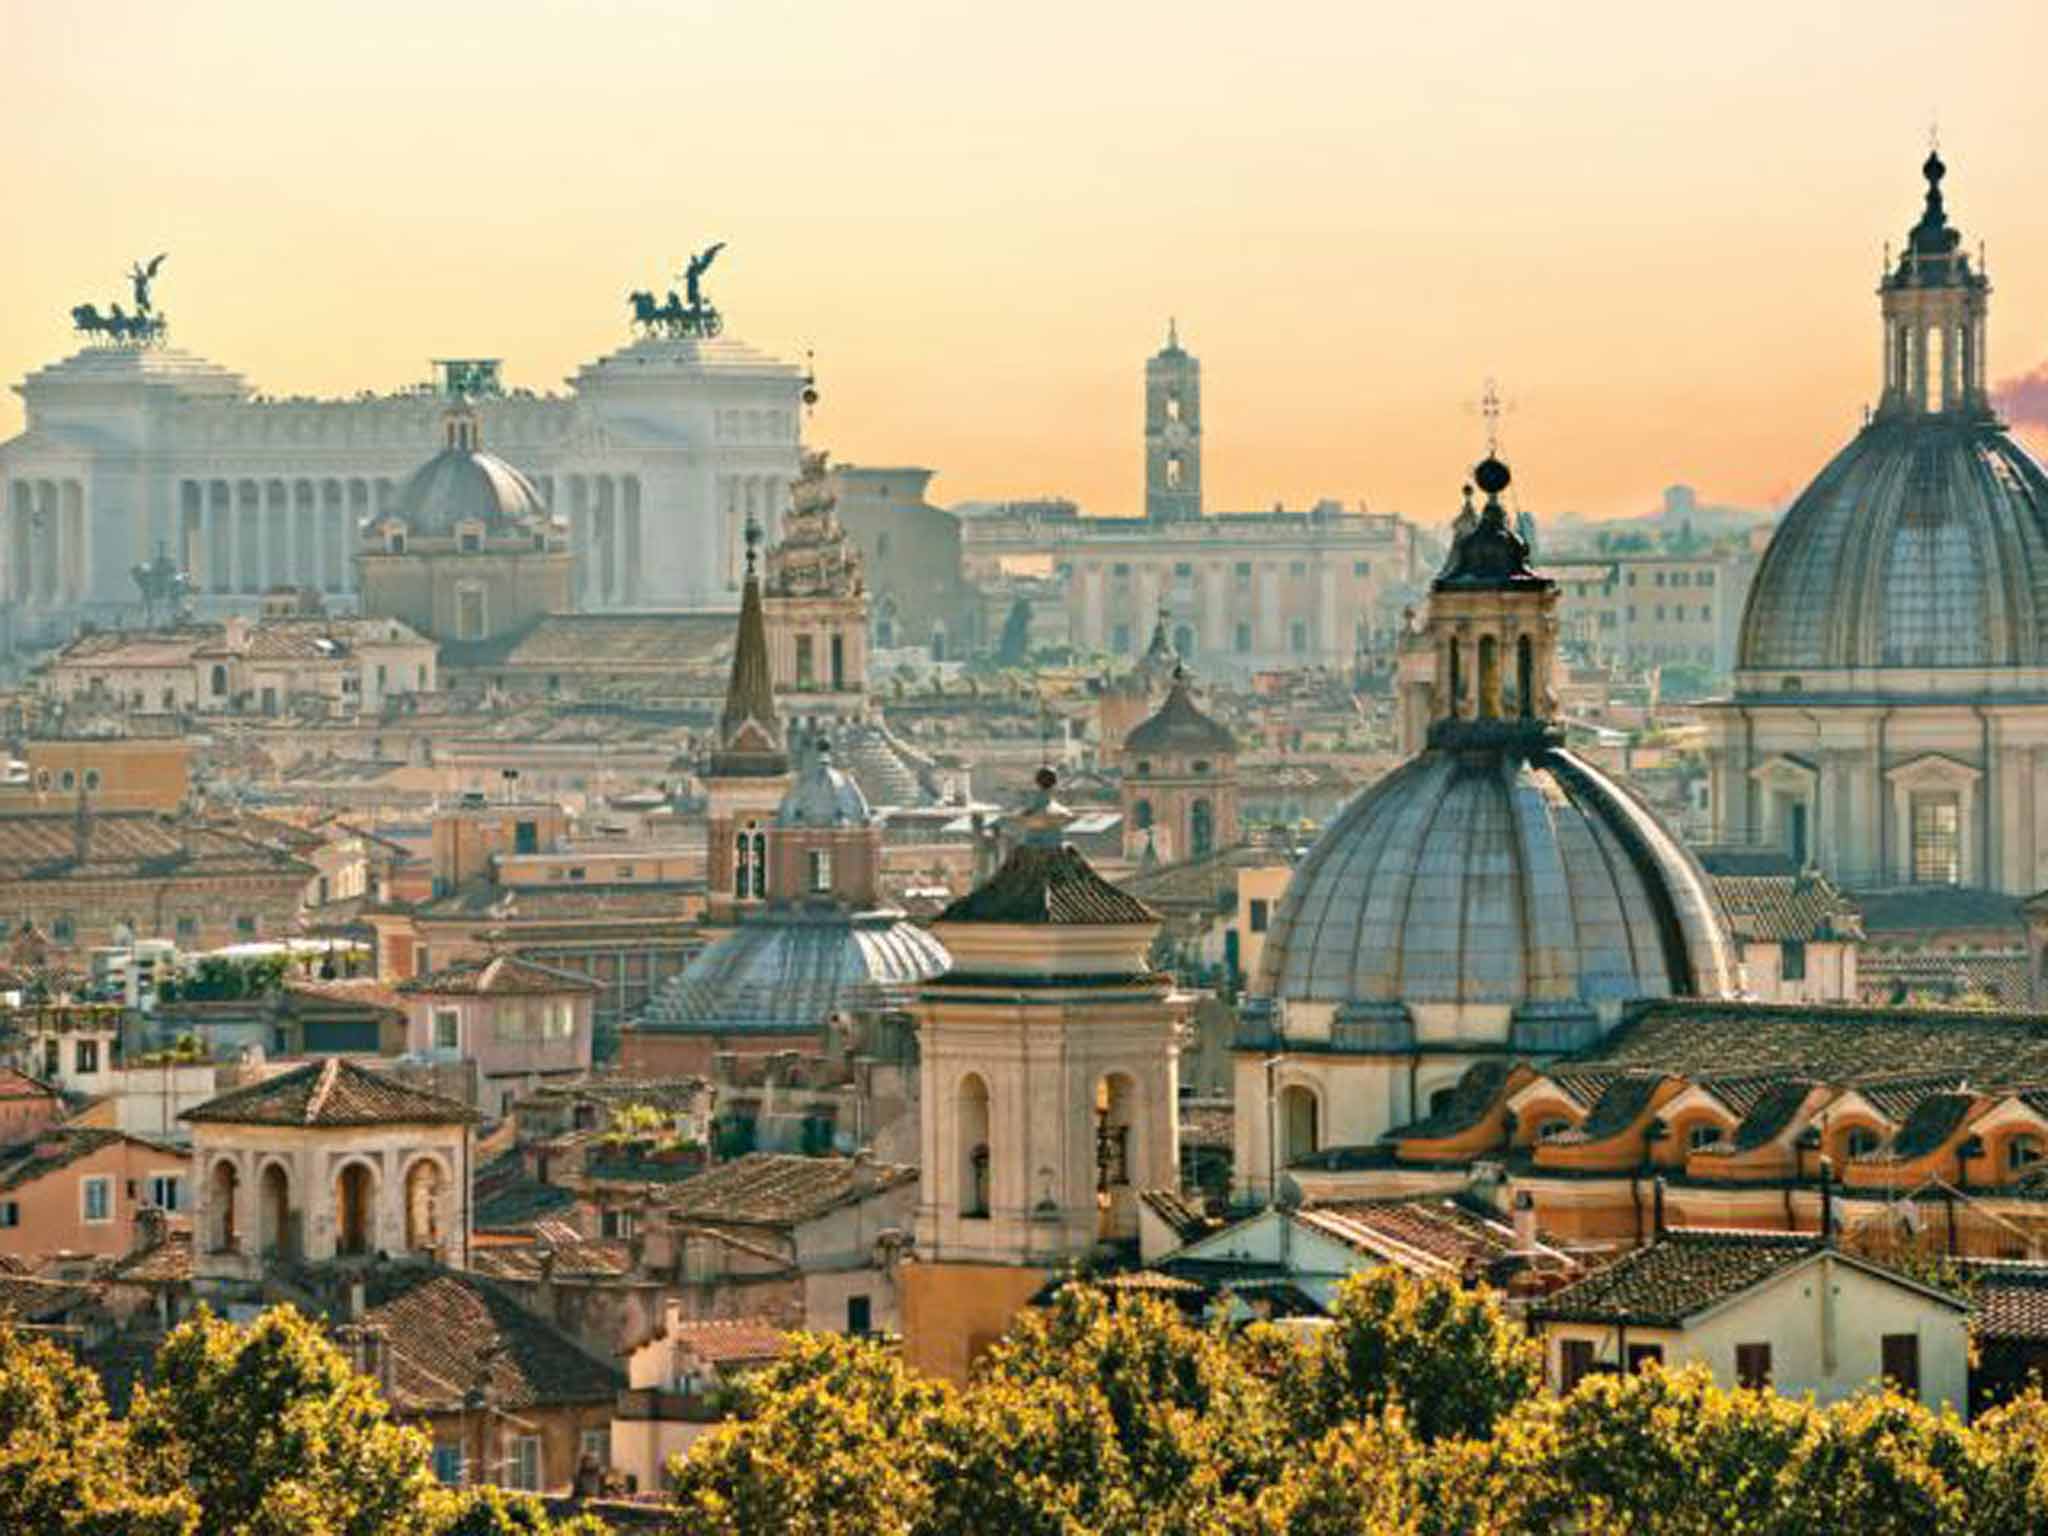 When in Rome: see the sights on Christmas Day